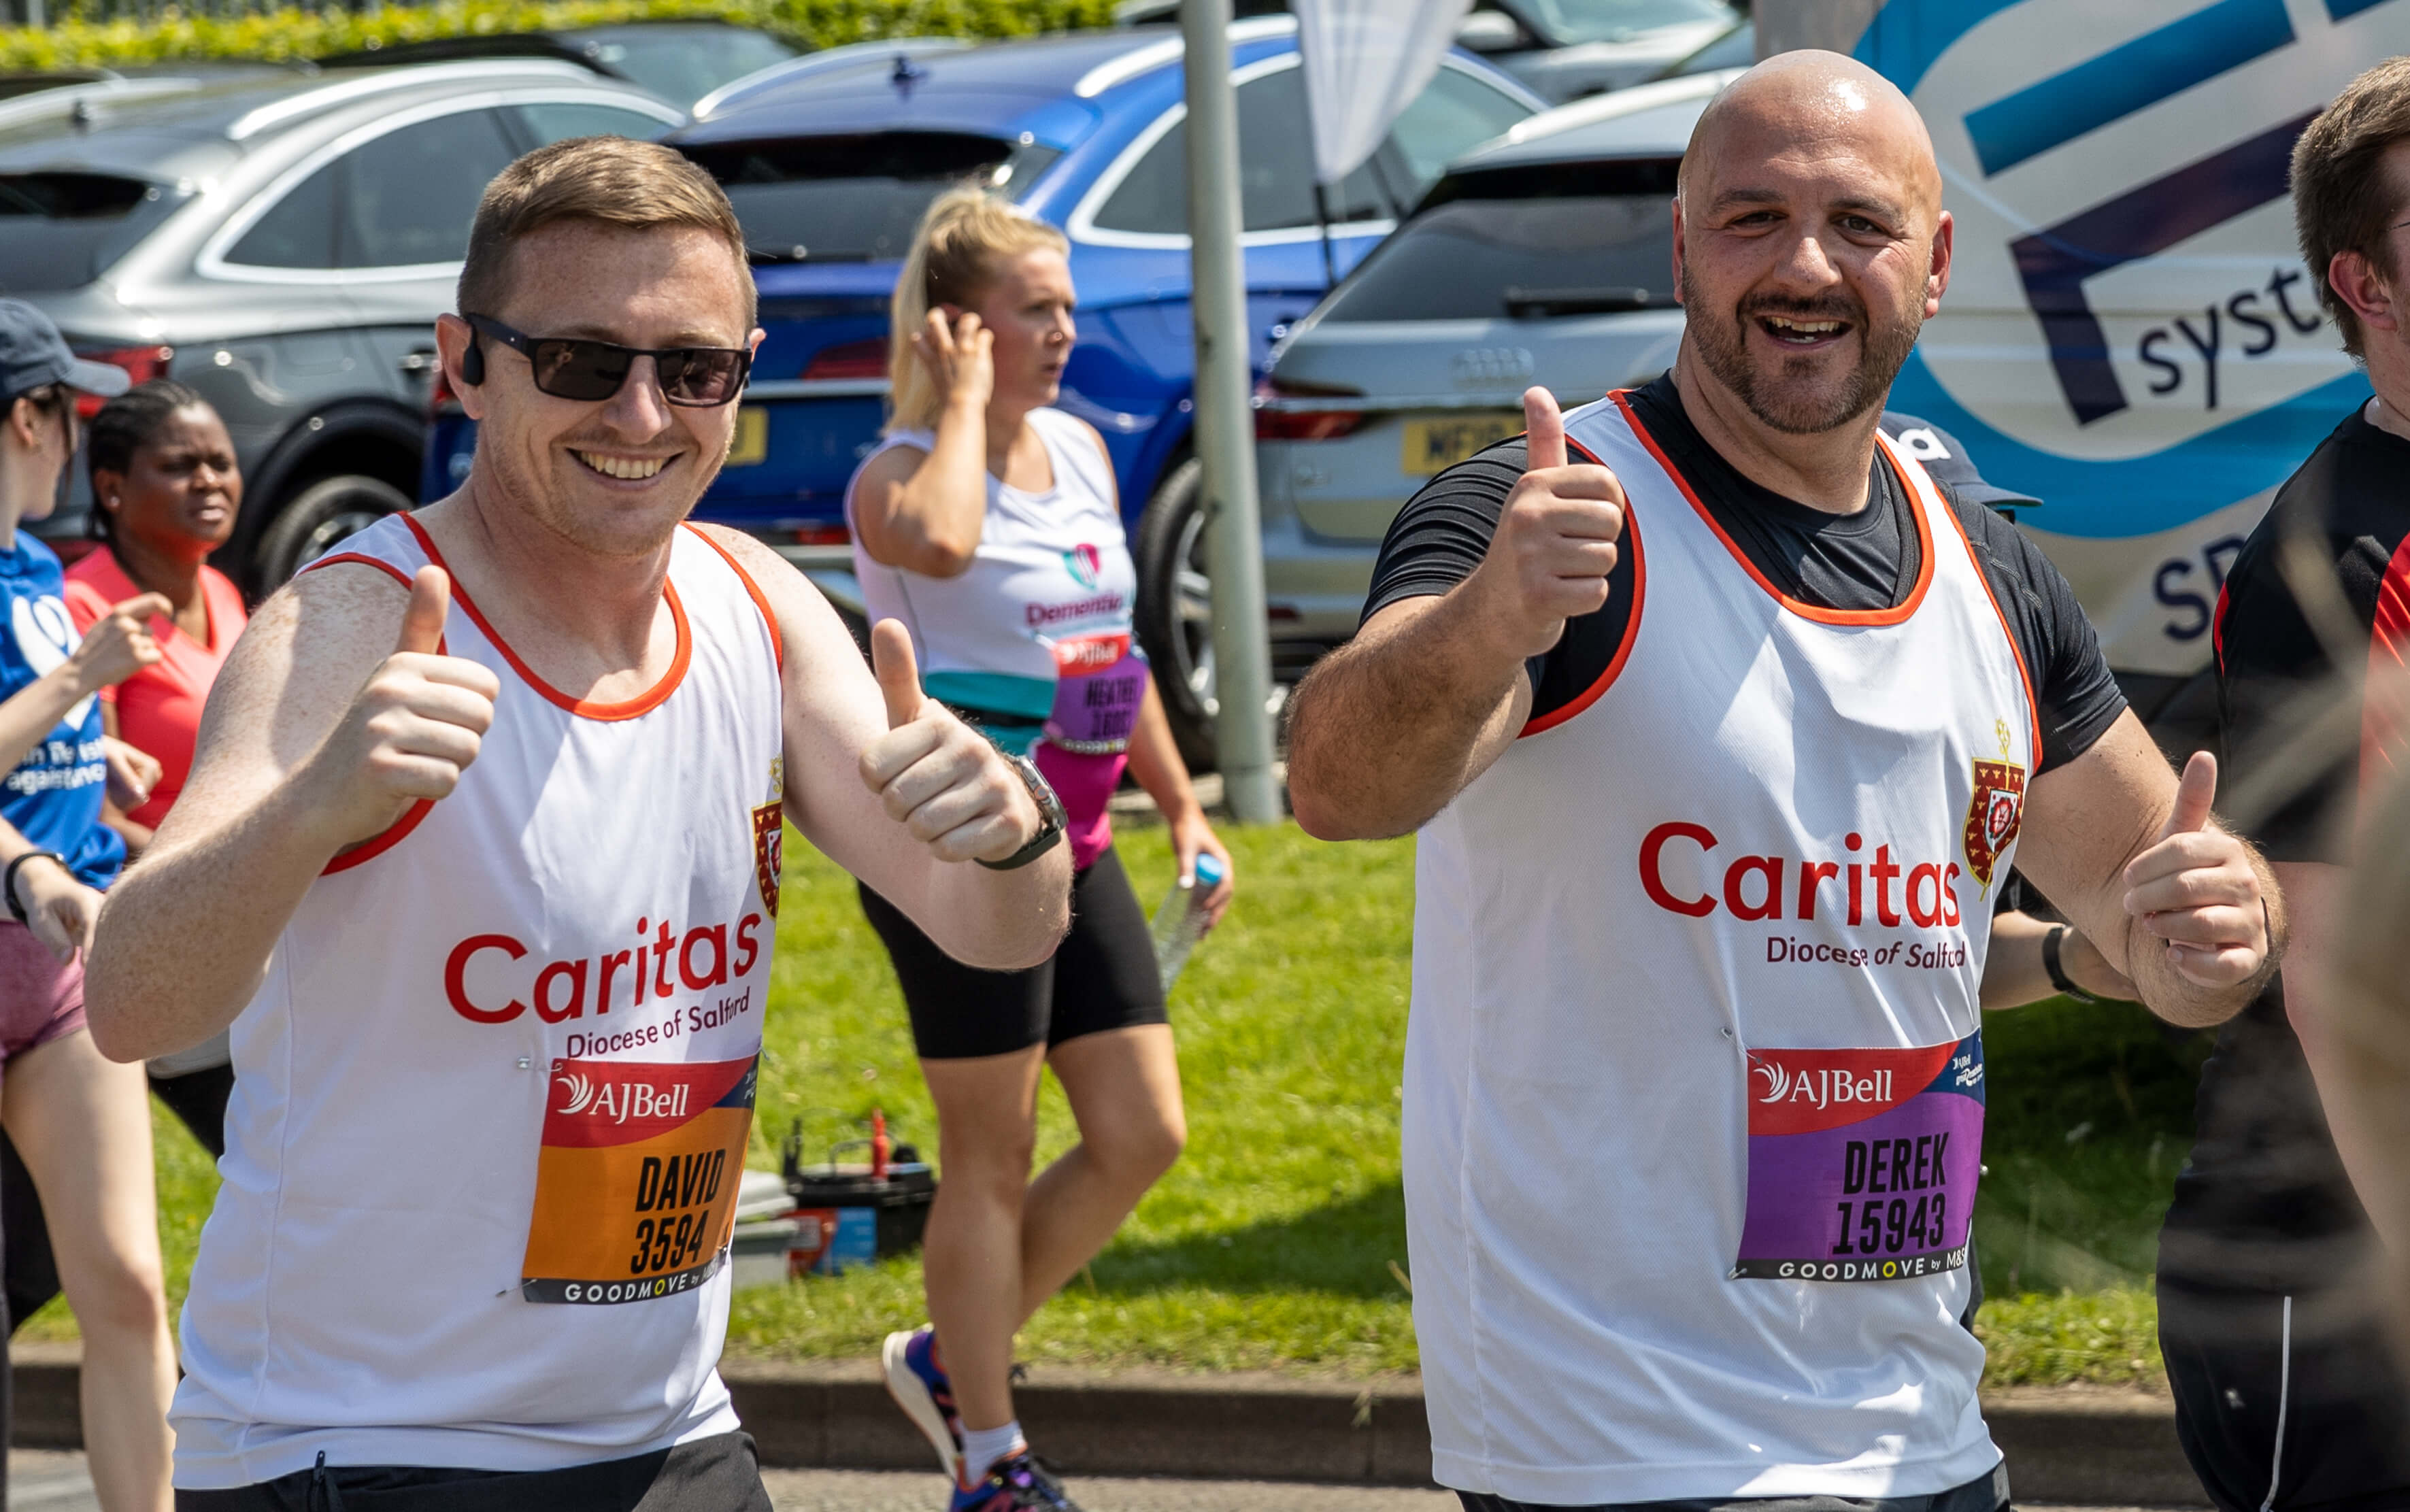 Two people in white Caritas running vests smiling at camera while running and giving thumbs up sign